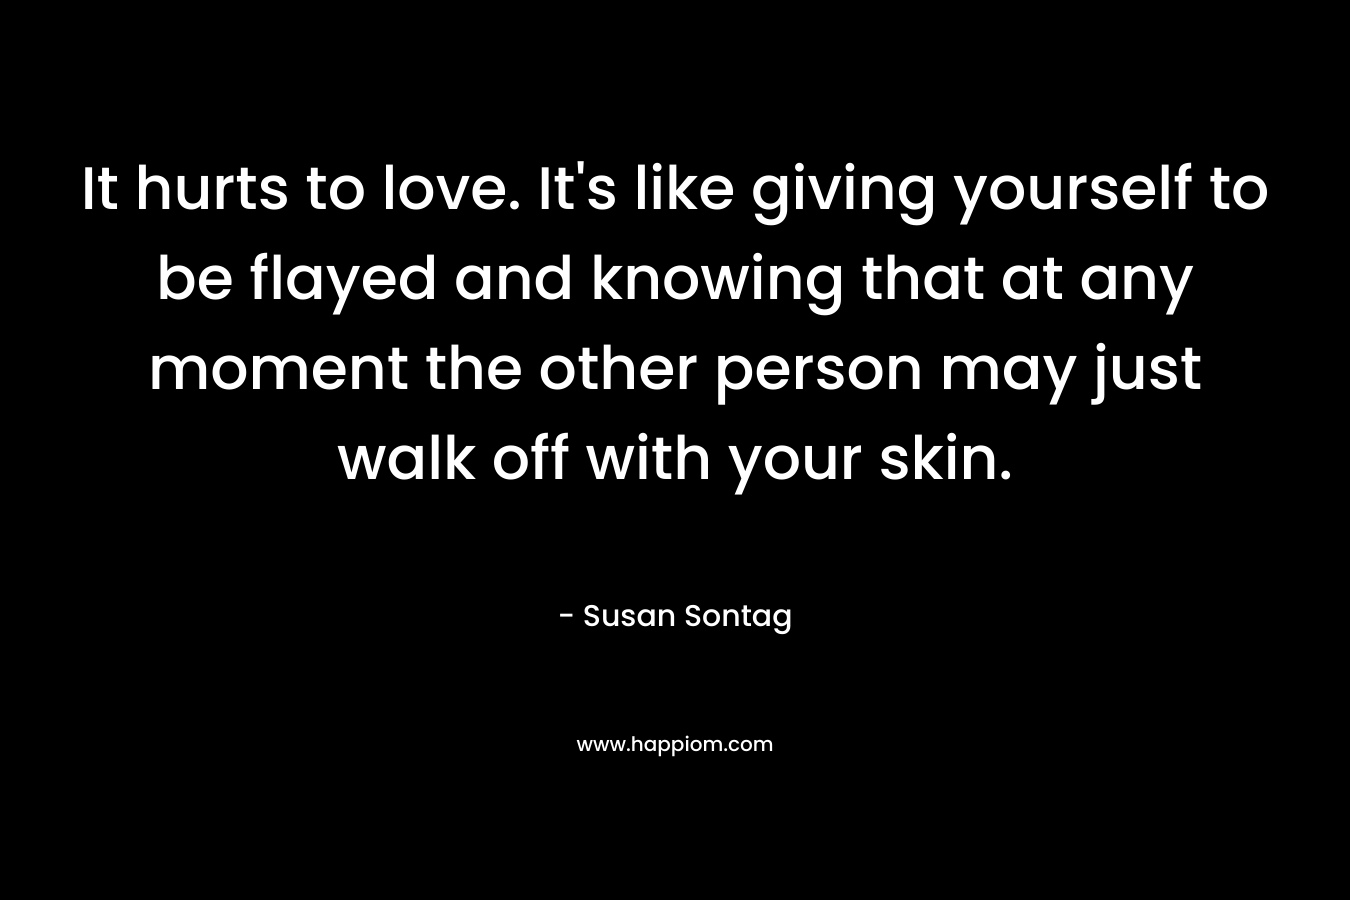 It hurts to love. It's like giving yourself to be flayed and knowing that at any moment the other person may just walk off with your skin.